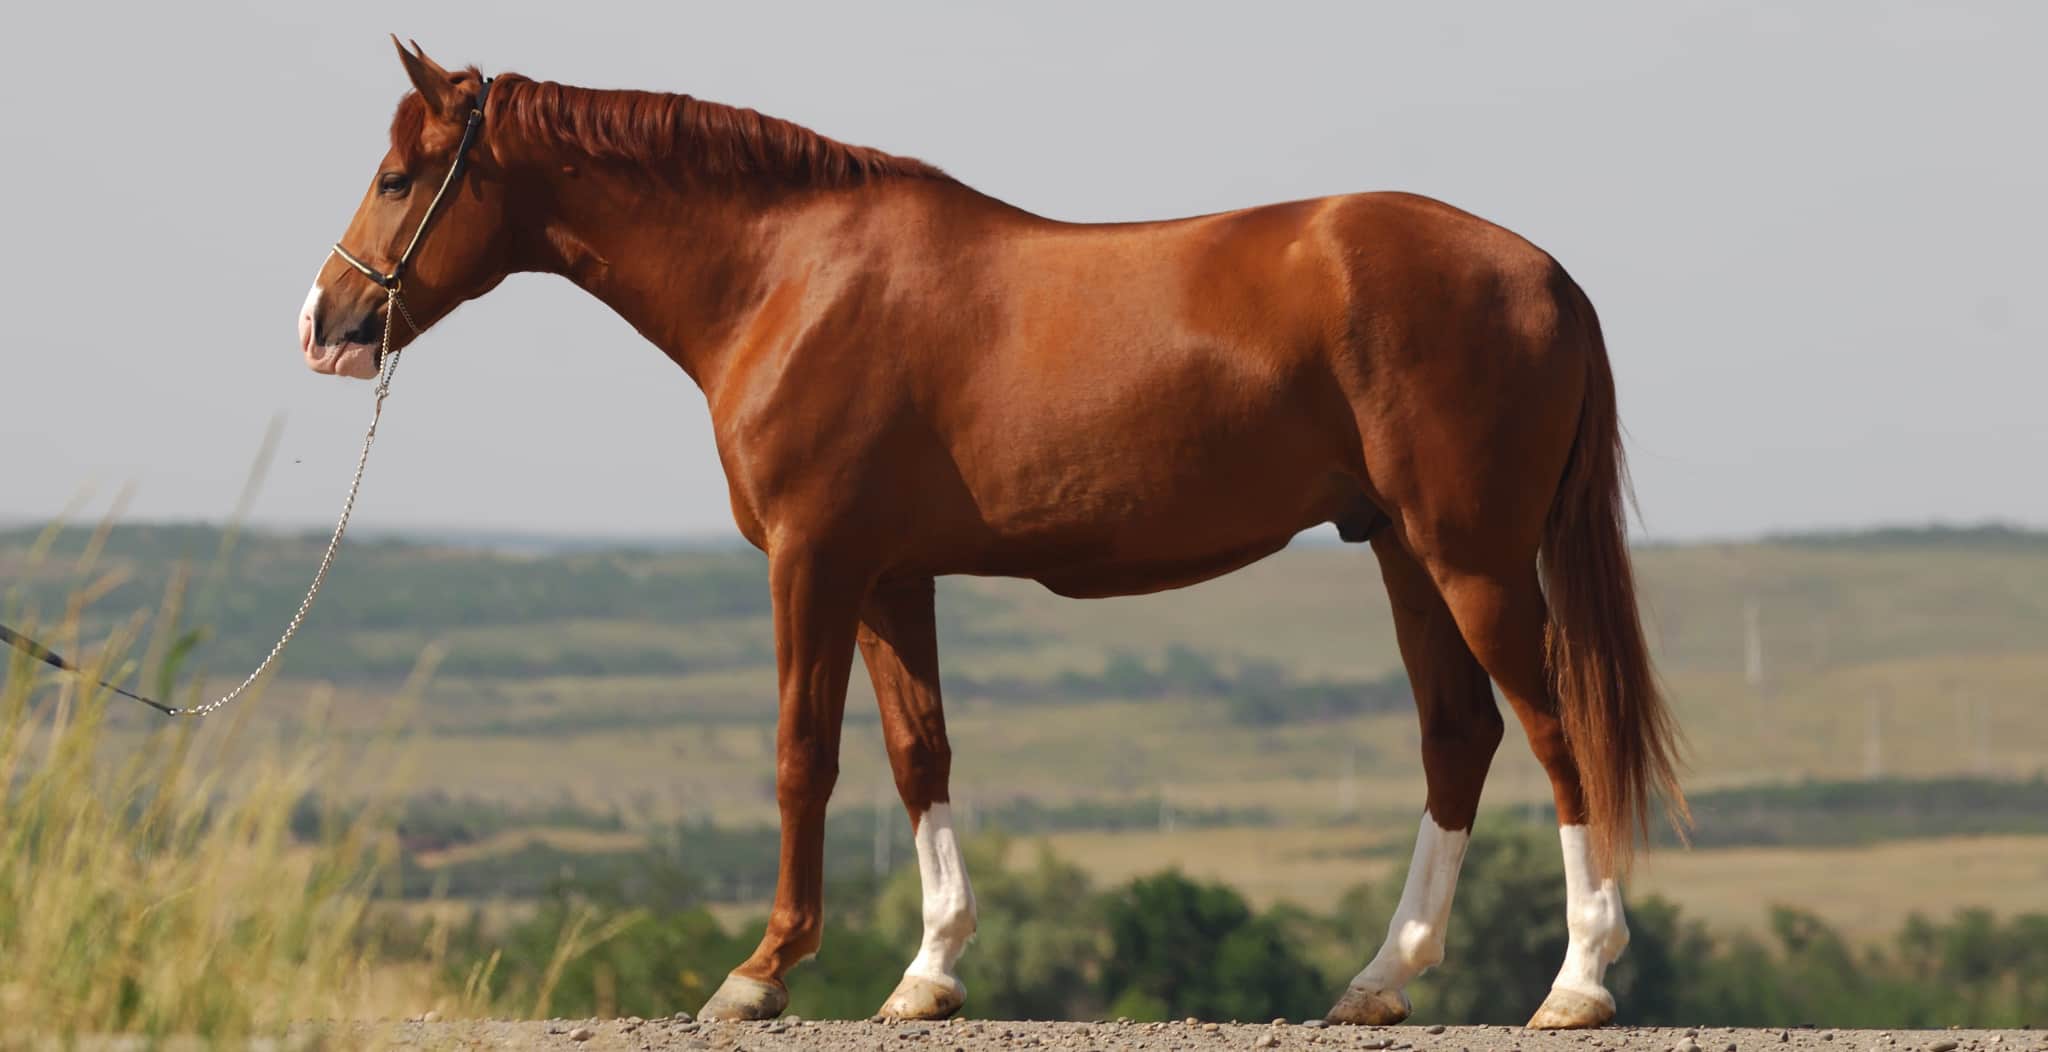 In this article we look at Edema in horses to understand the causes, diagnosis techniques and commonly used treatments to support a horse with Edema inflammation.